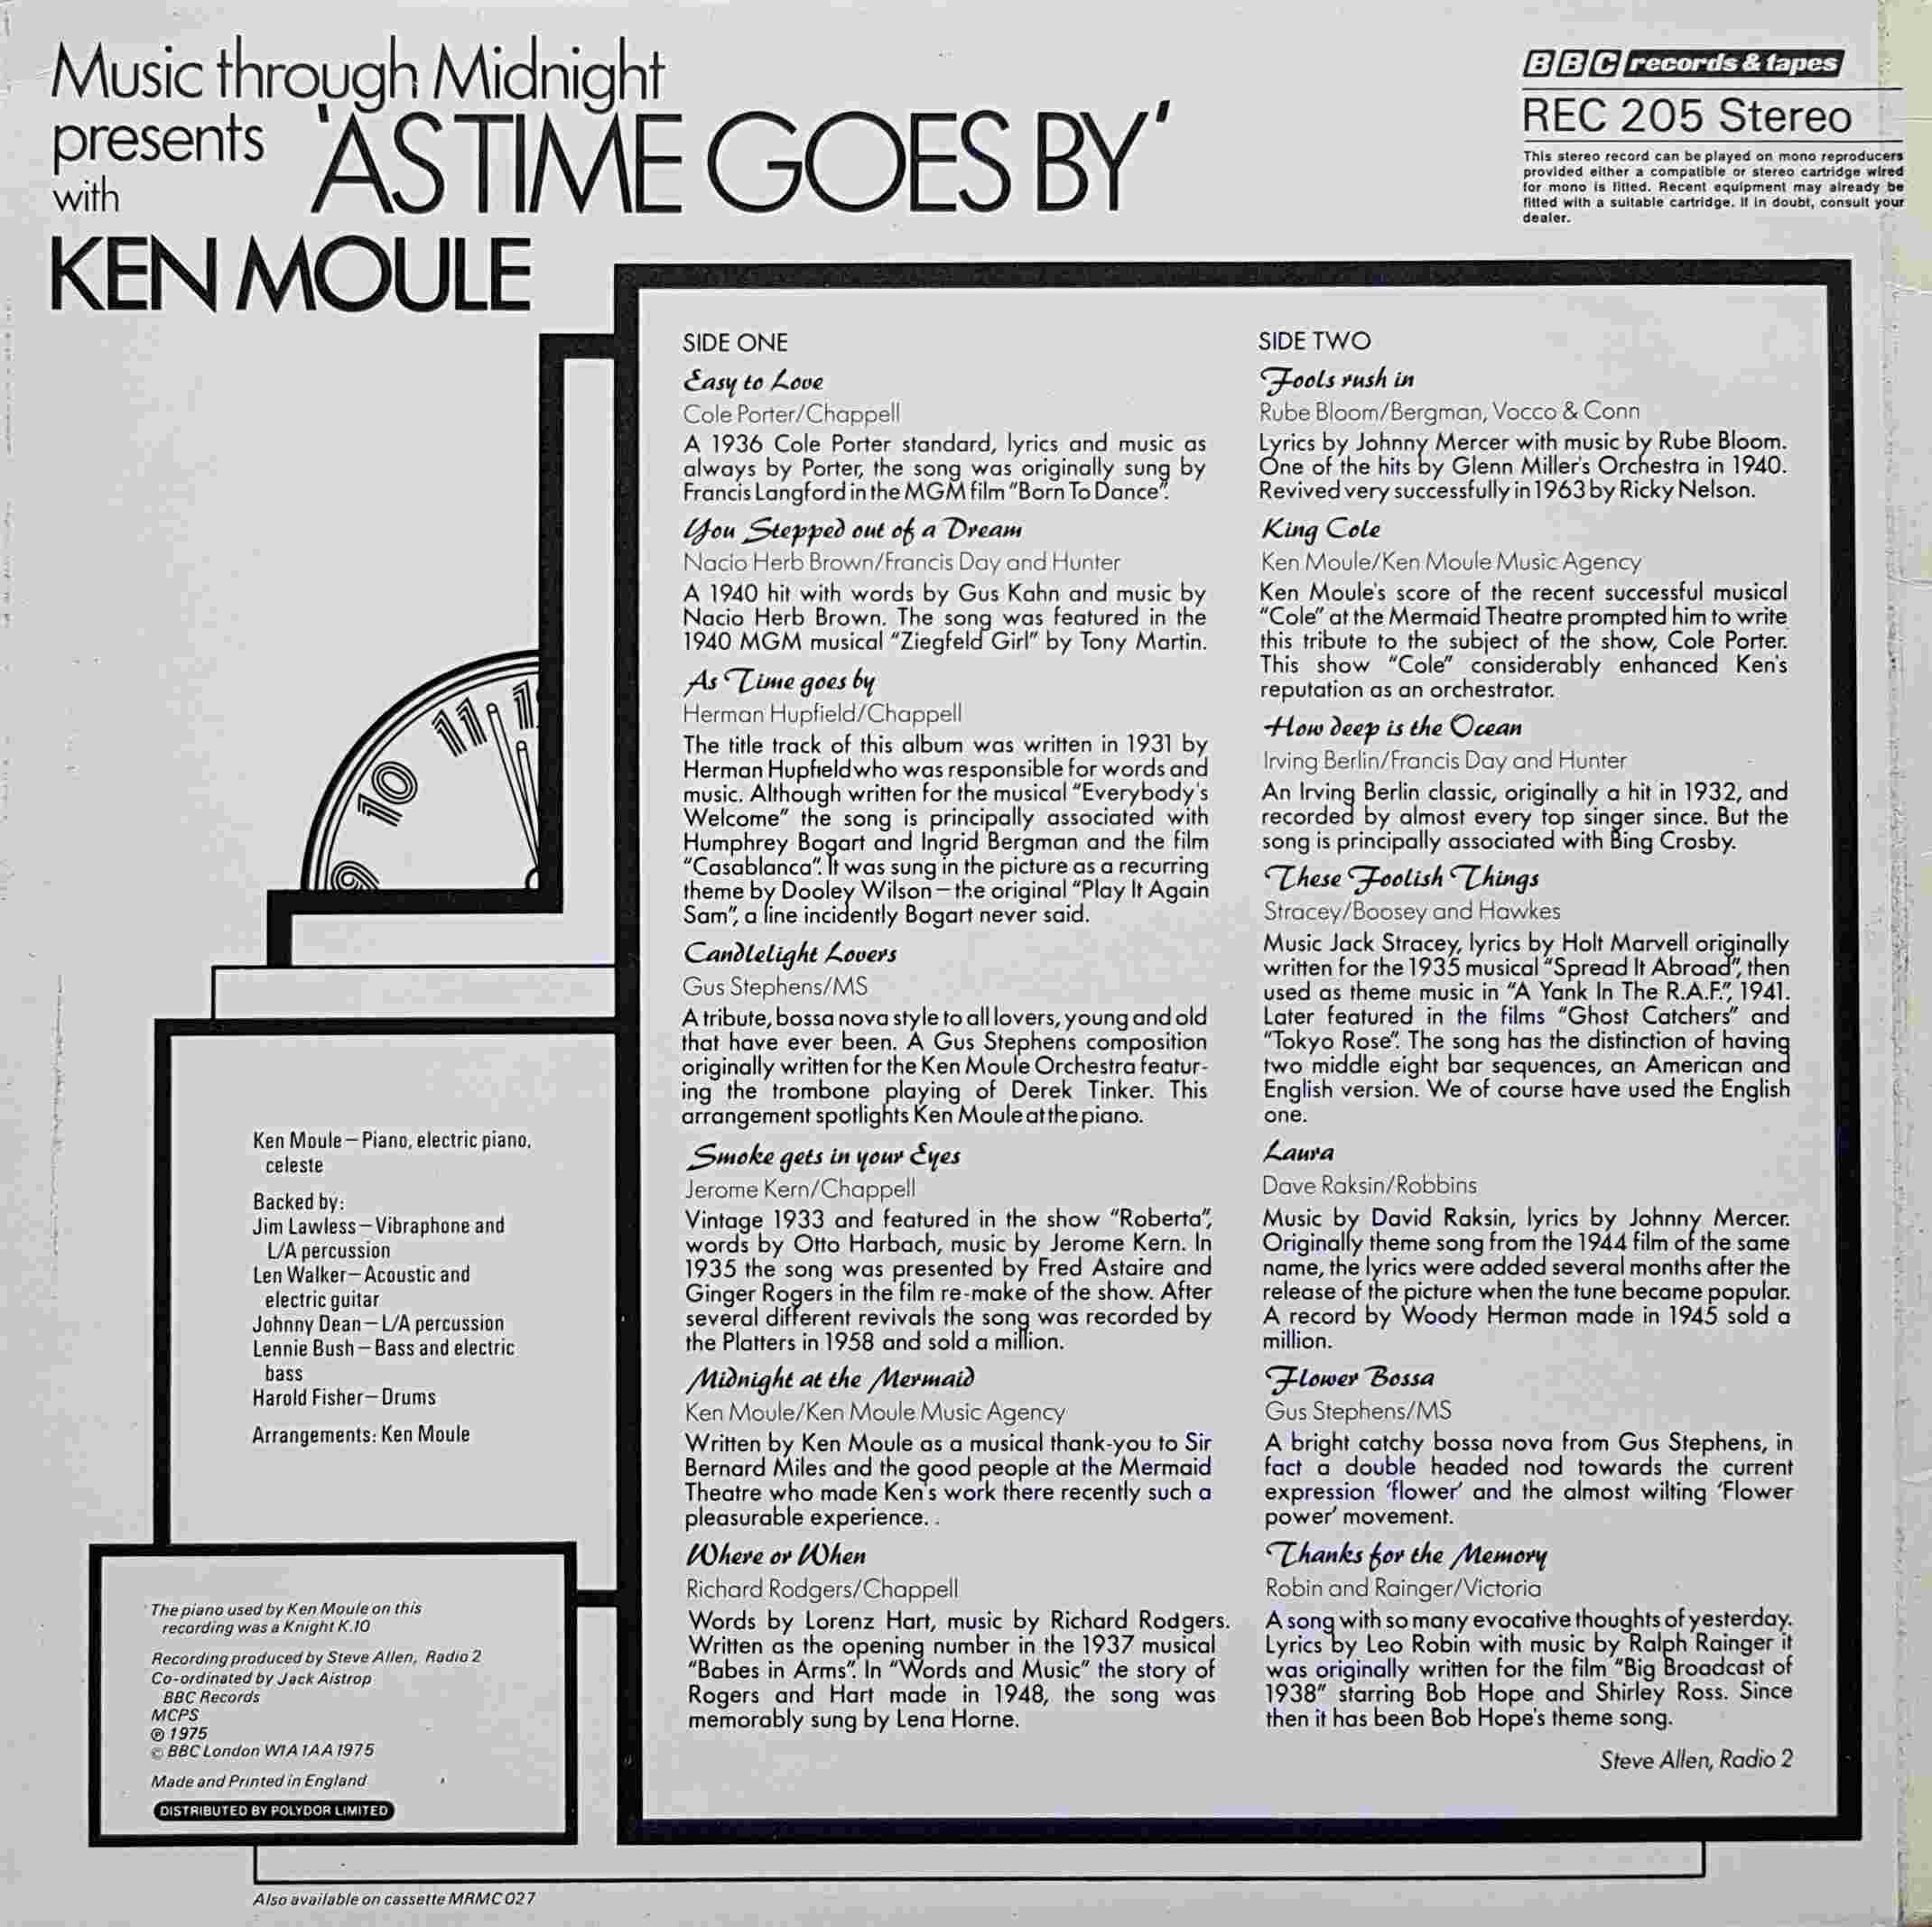 Picture of REC 205 As time goes by by artist Ken Moule from the BBC records and Tapes library